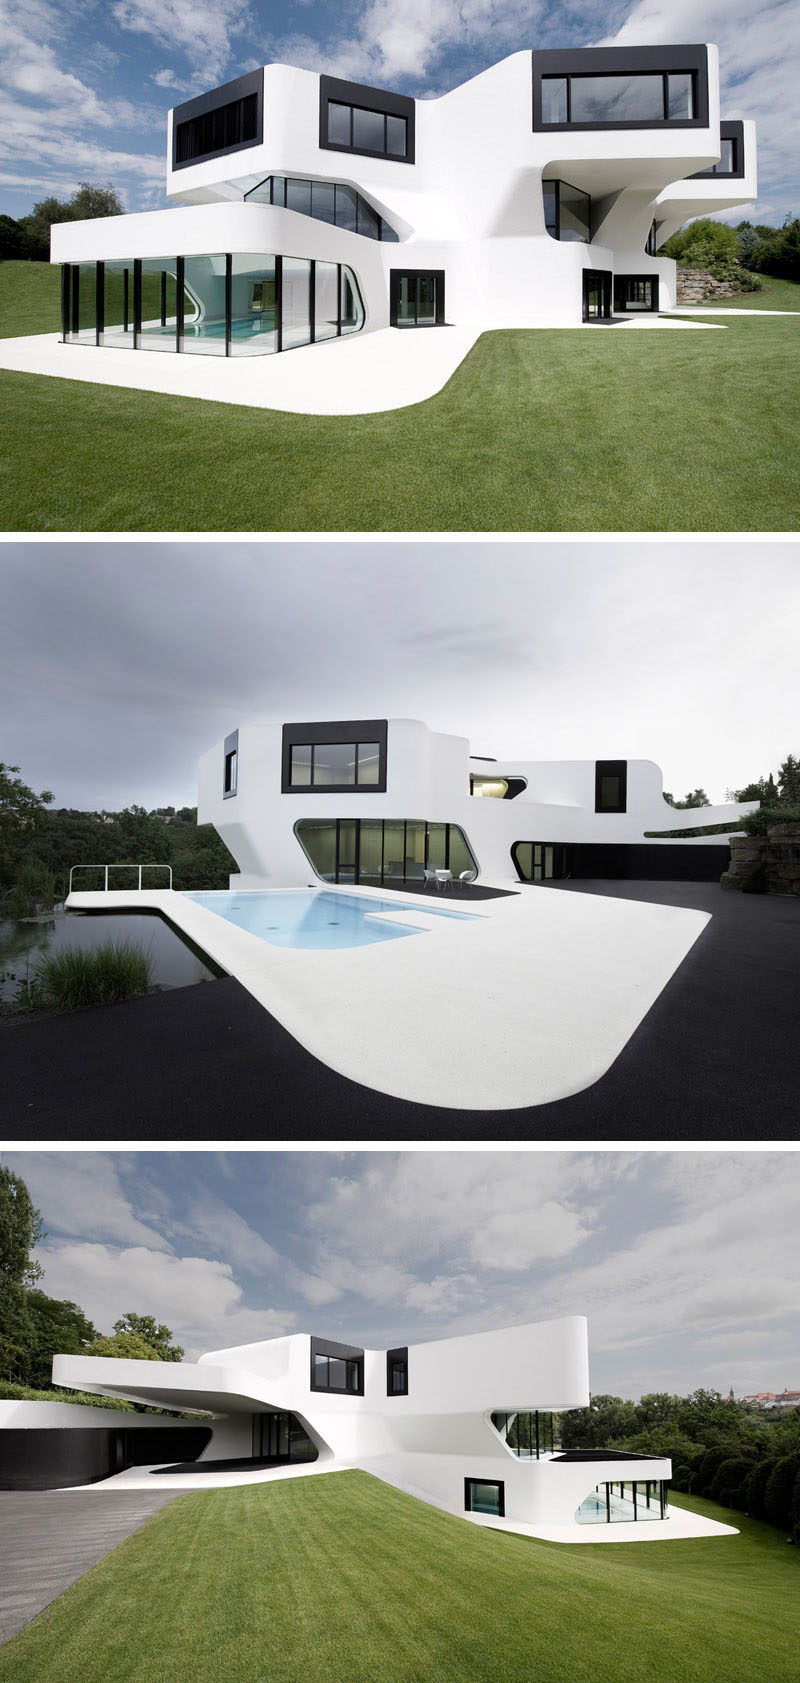 House Exterior Colors - 11 Modern White Houses From Around The World // The curved lines and pops of black against this large white house give it a clean, futuristic look.